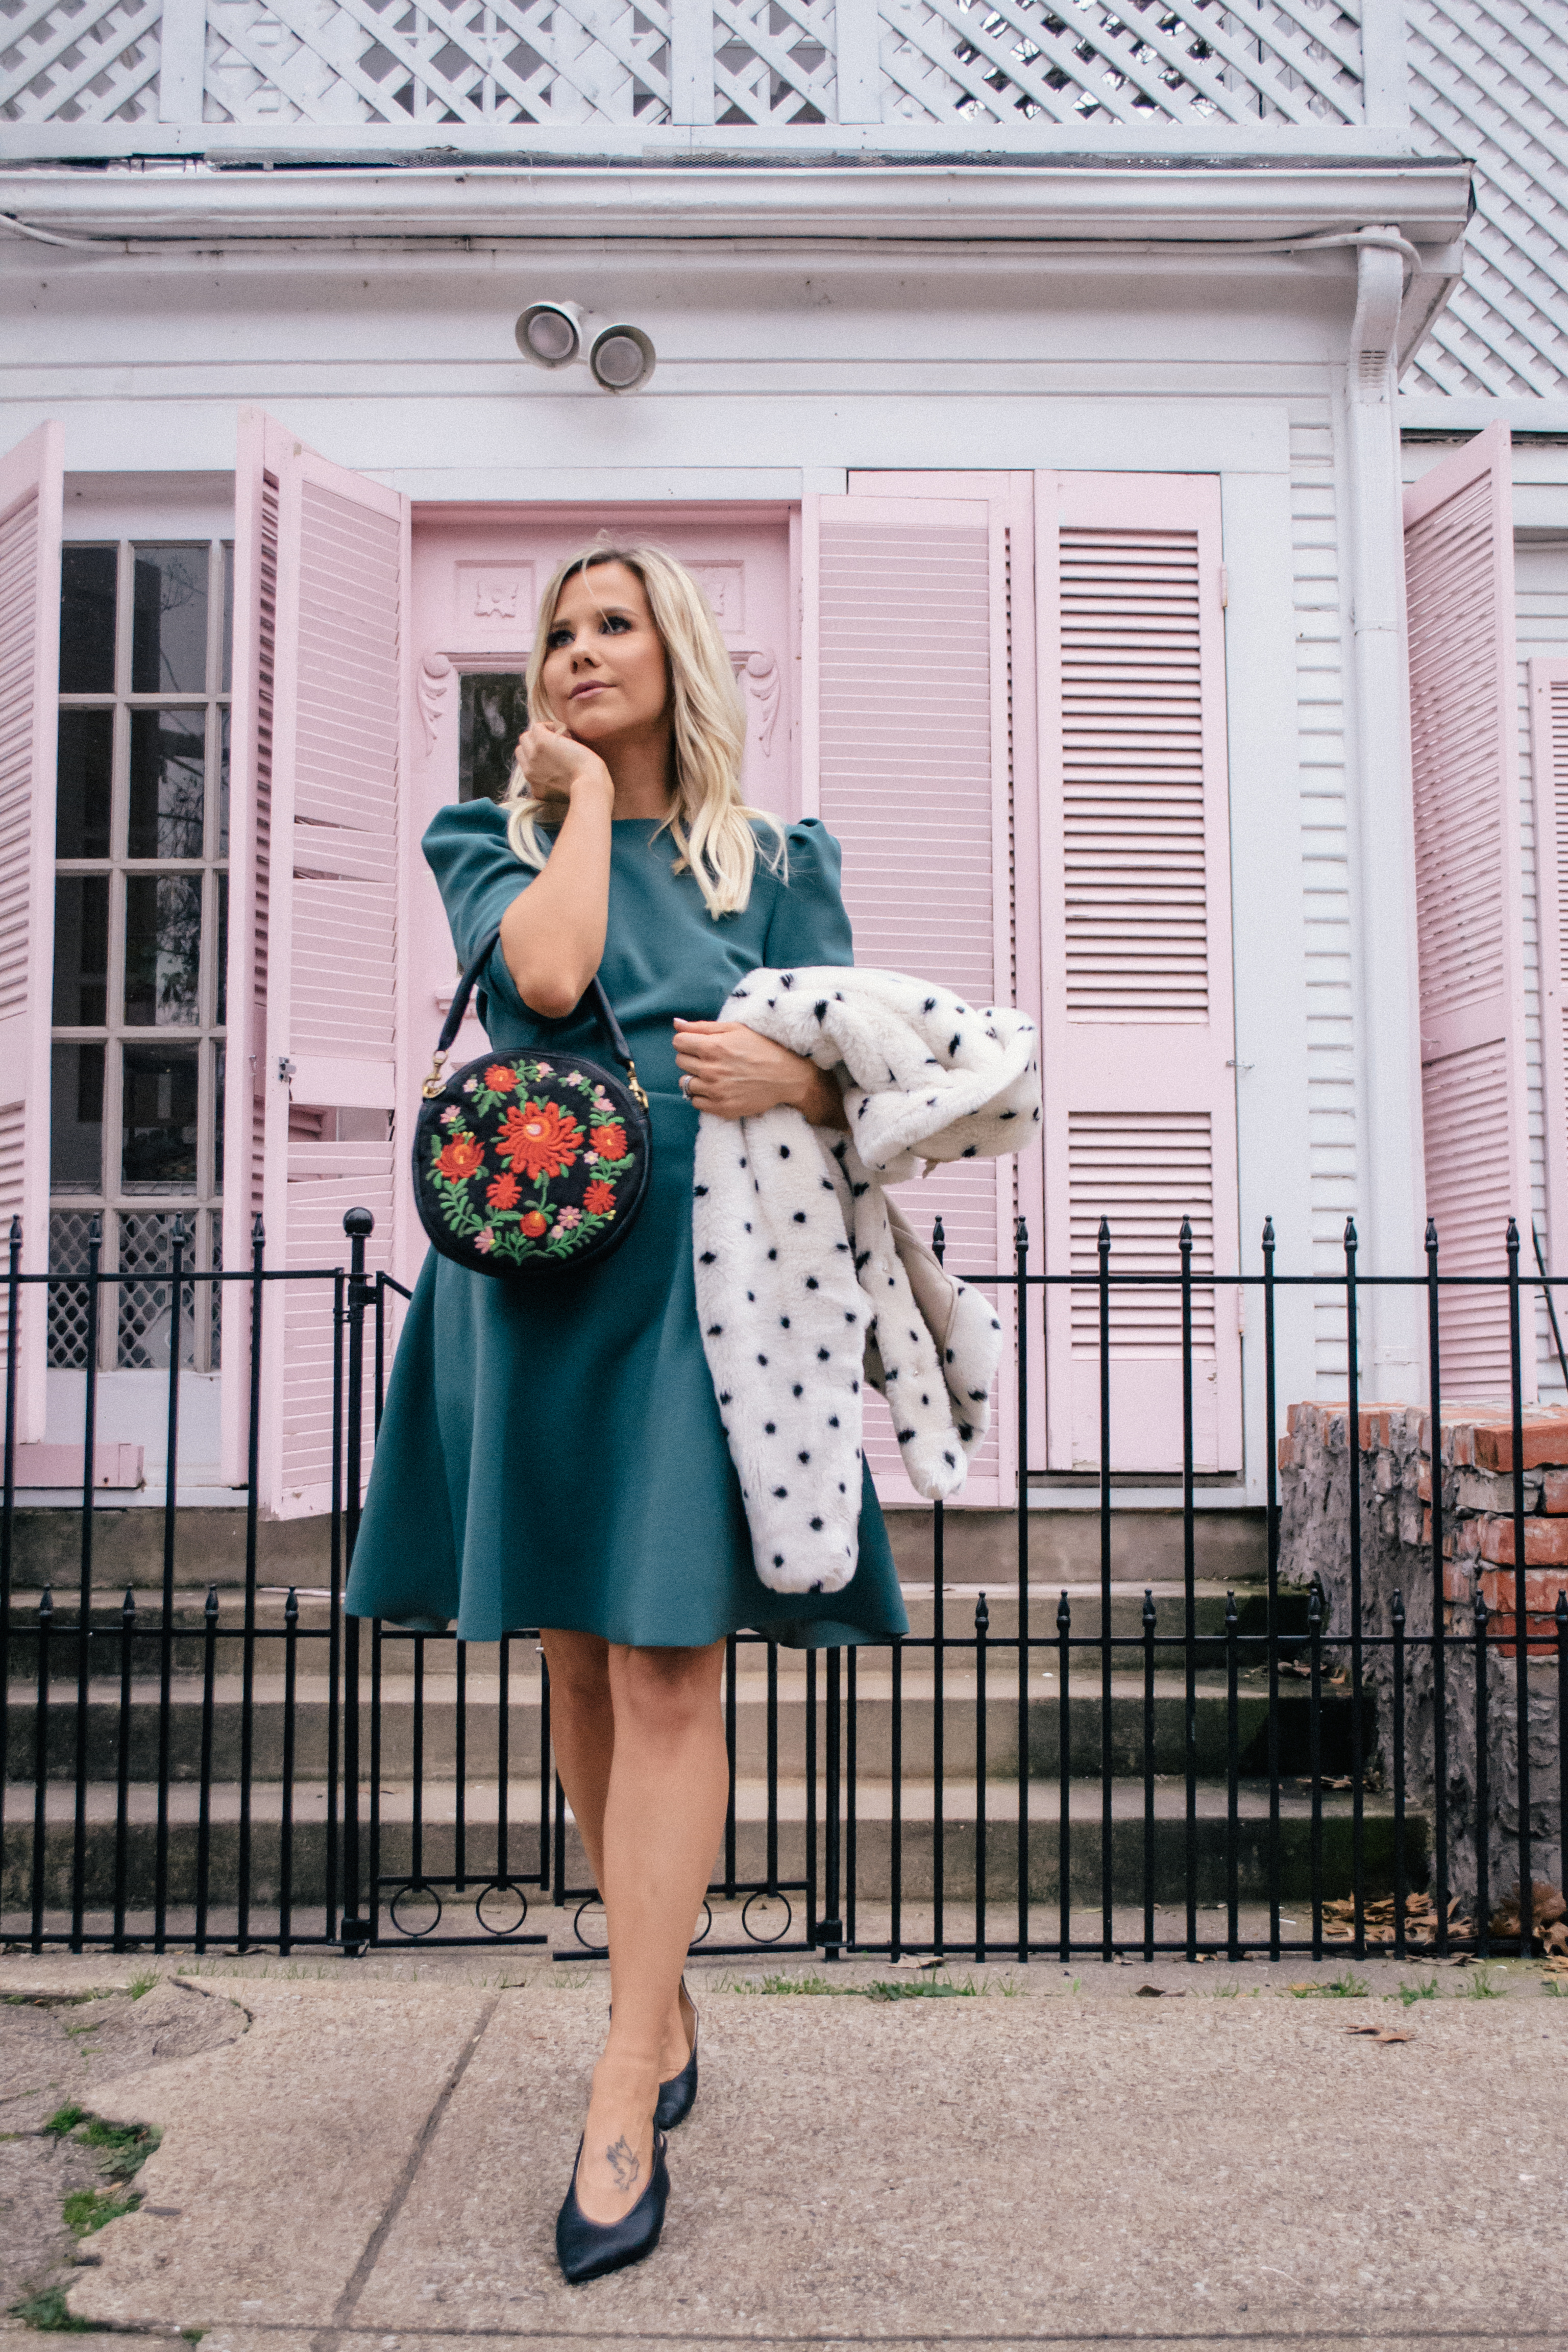 Timeless style, vintage style, Dallas Blogger, Glam Life Living #dallasblogger #mididress #timelessstyle